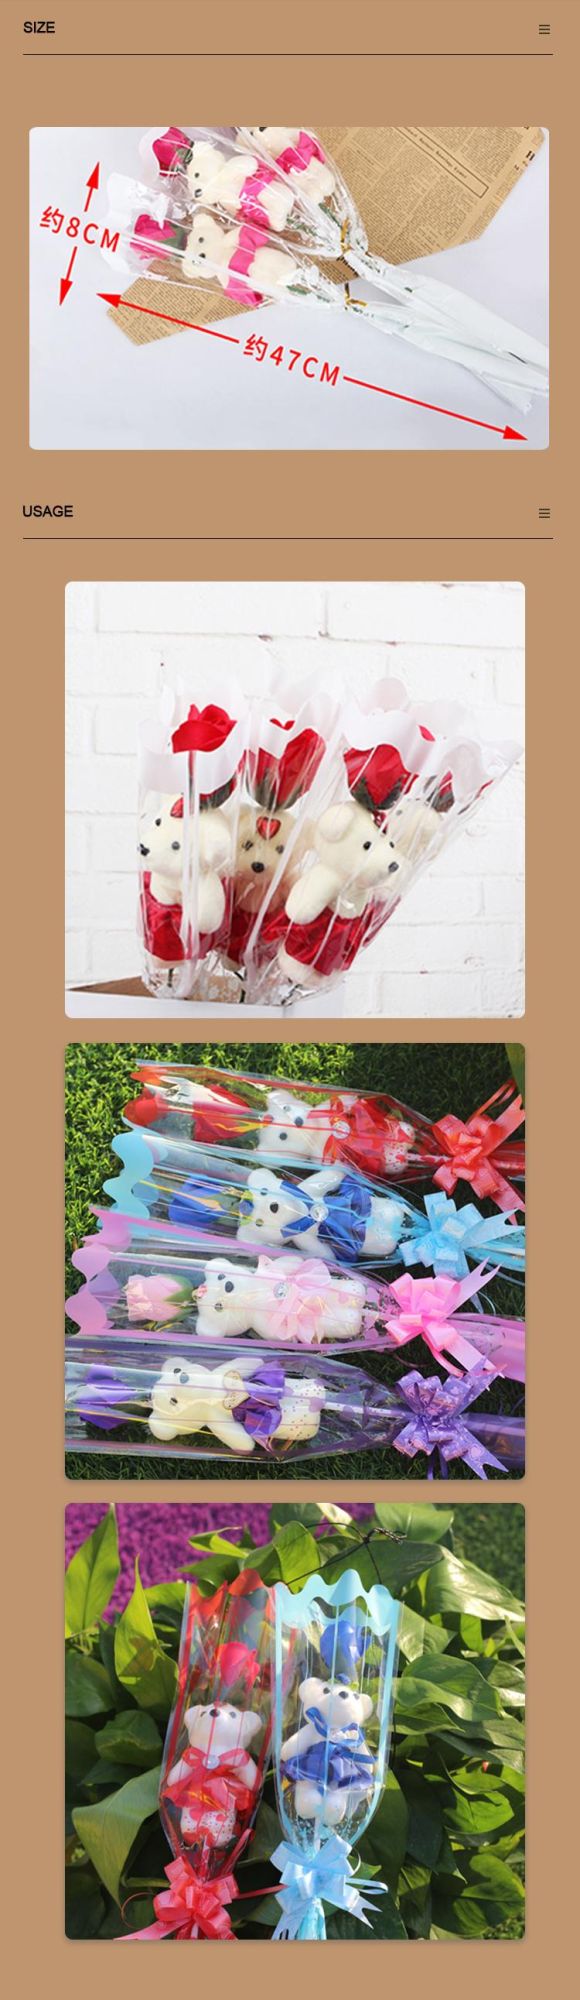 Rose Flower Soap Teddy Bear Gifts for Christmas, Valentine′s Day, Mother′s Day Gifts